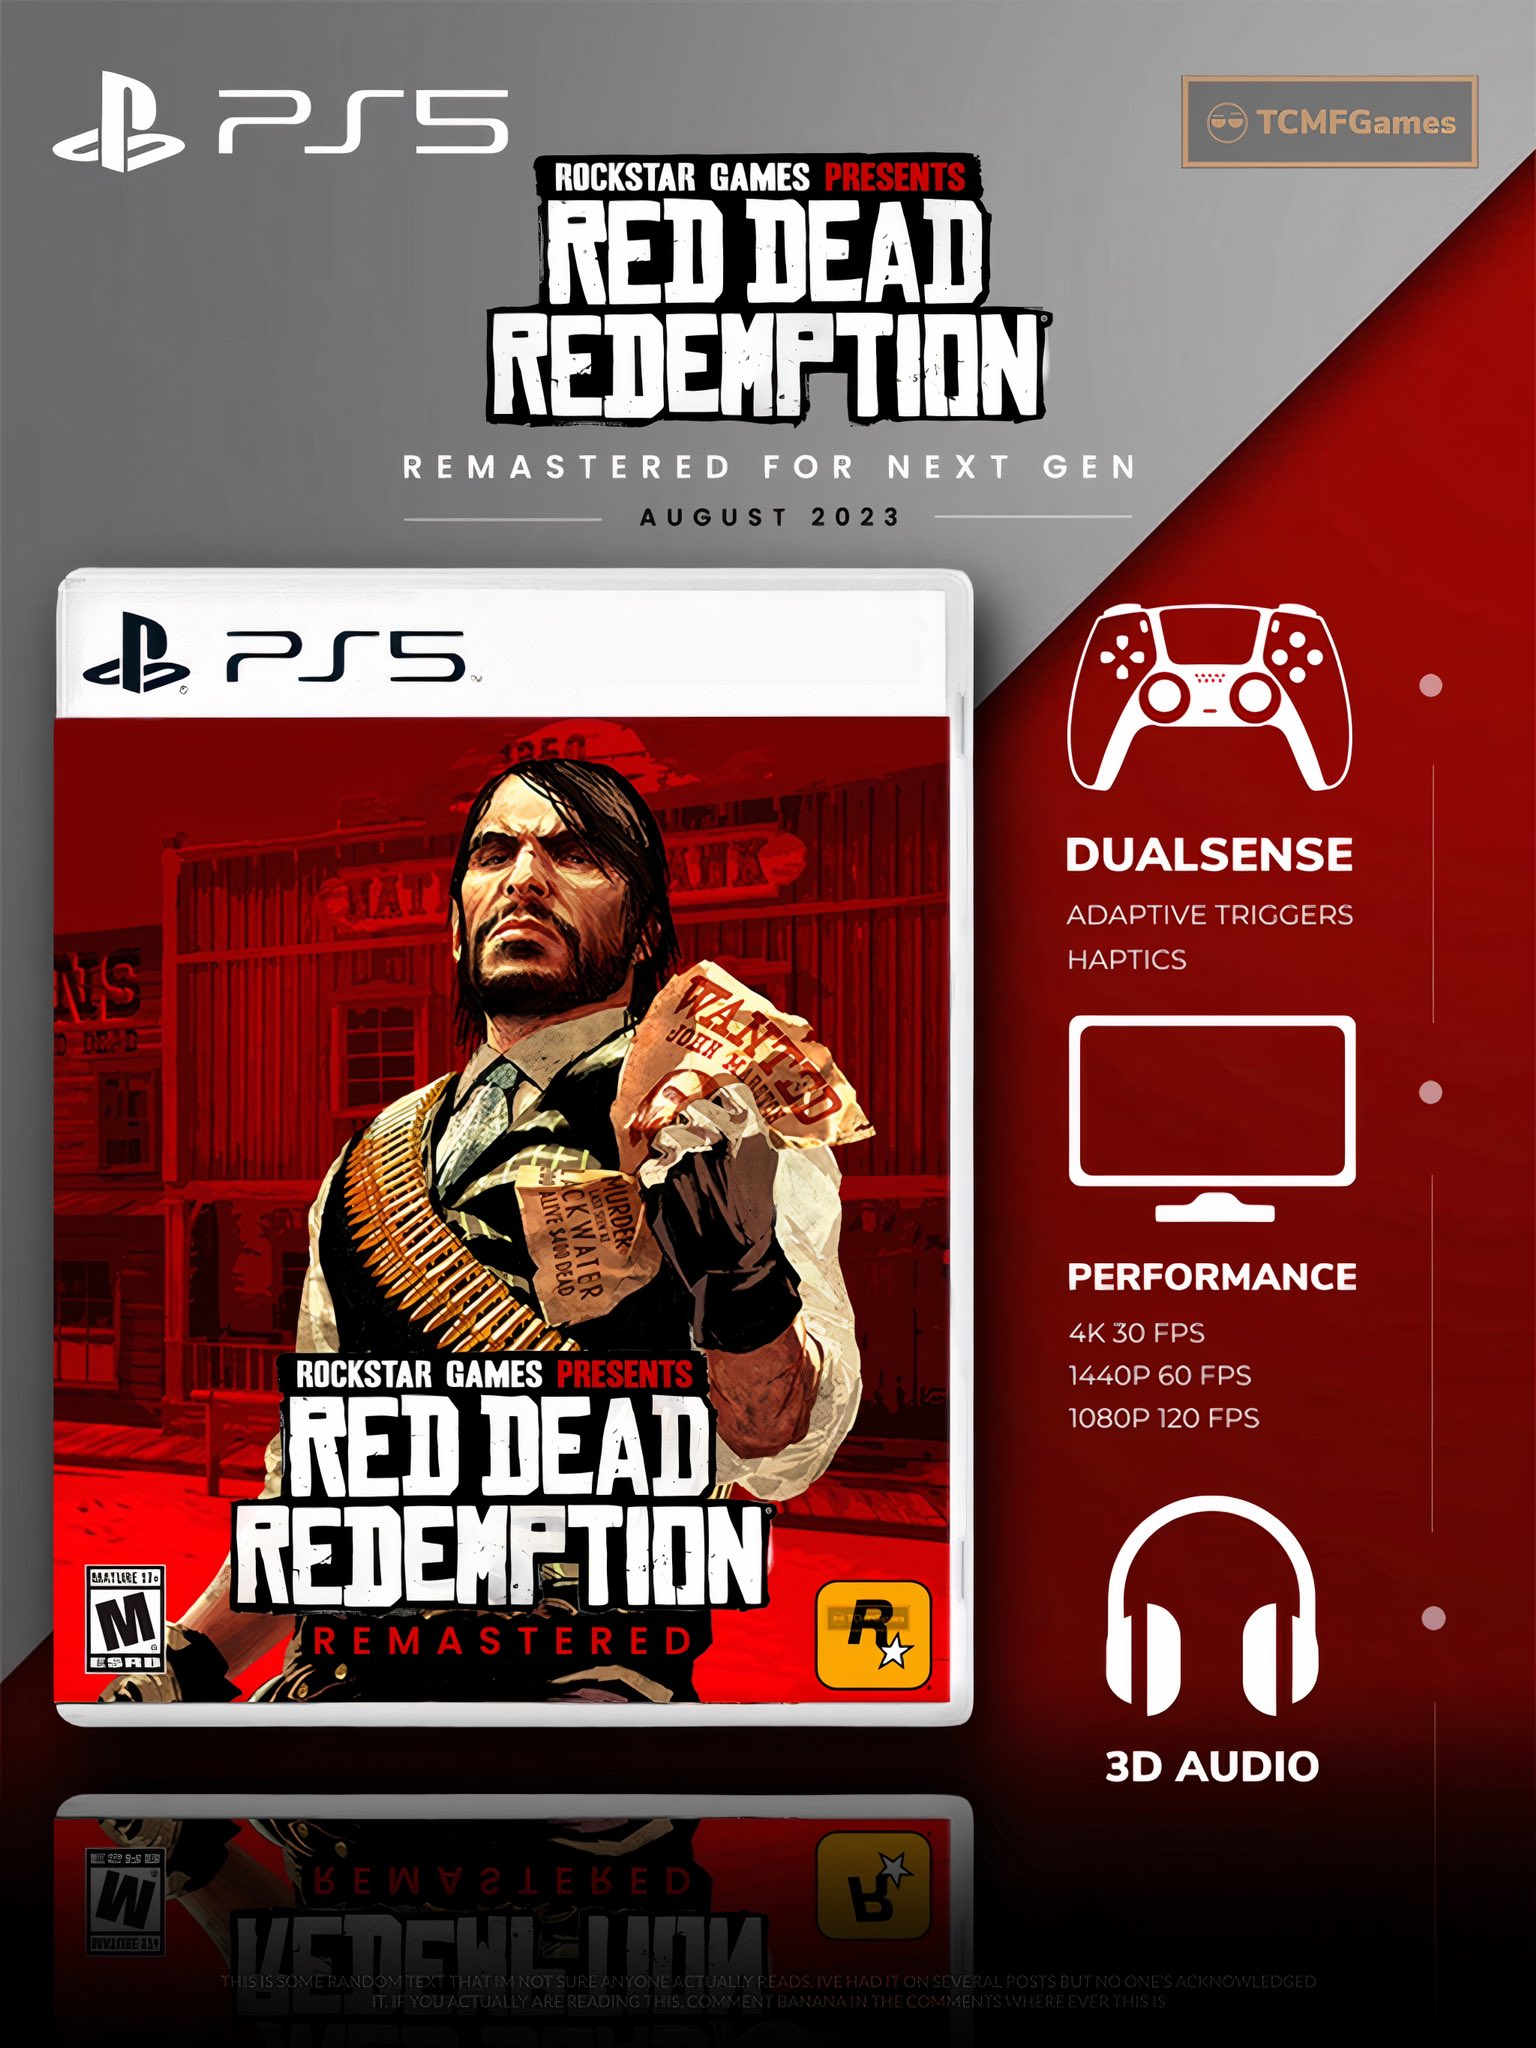 TCMFGames on X: Red Dead Redemption Remastered for PS5 reveal